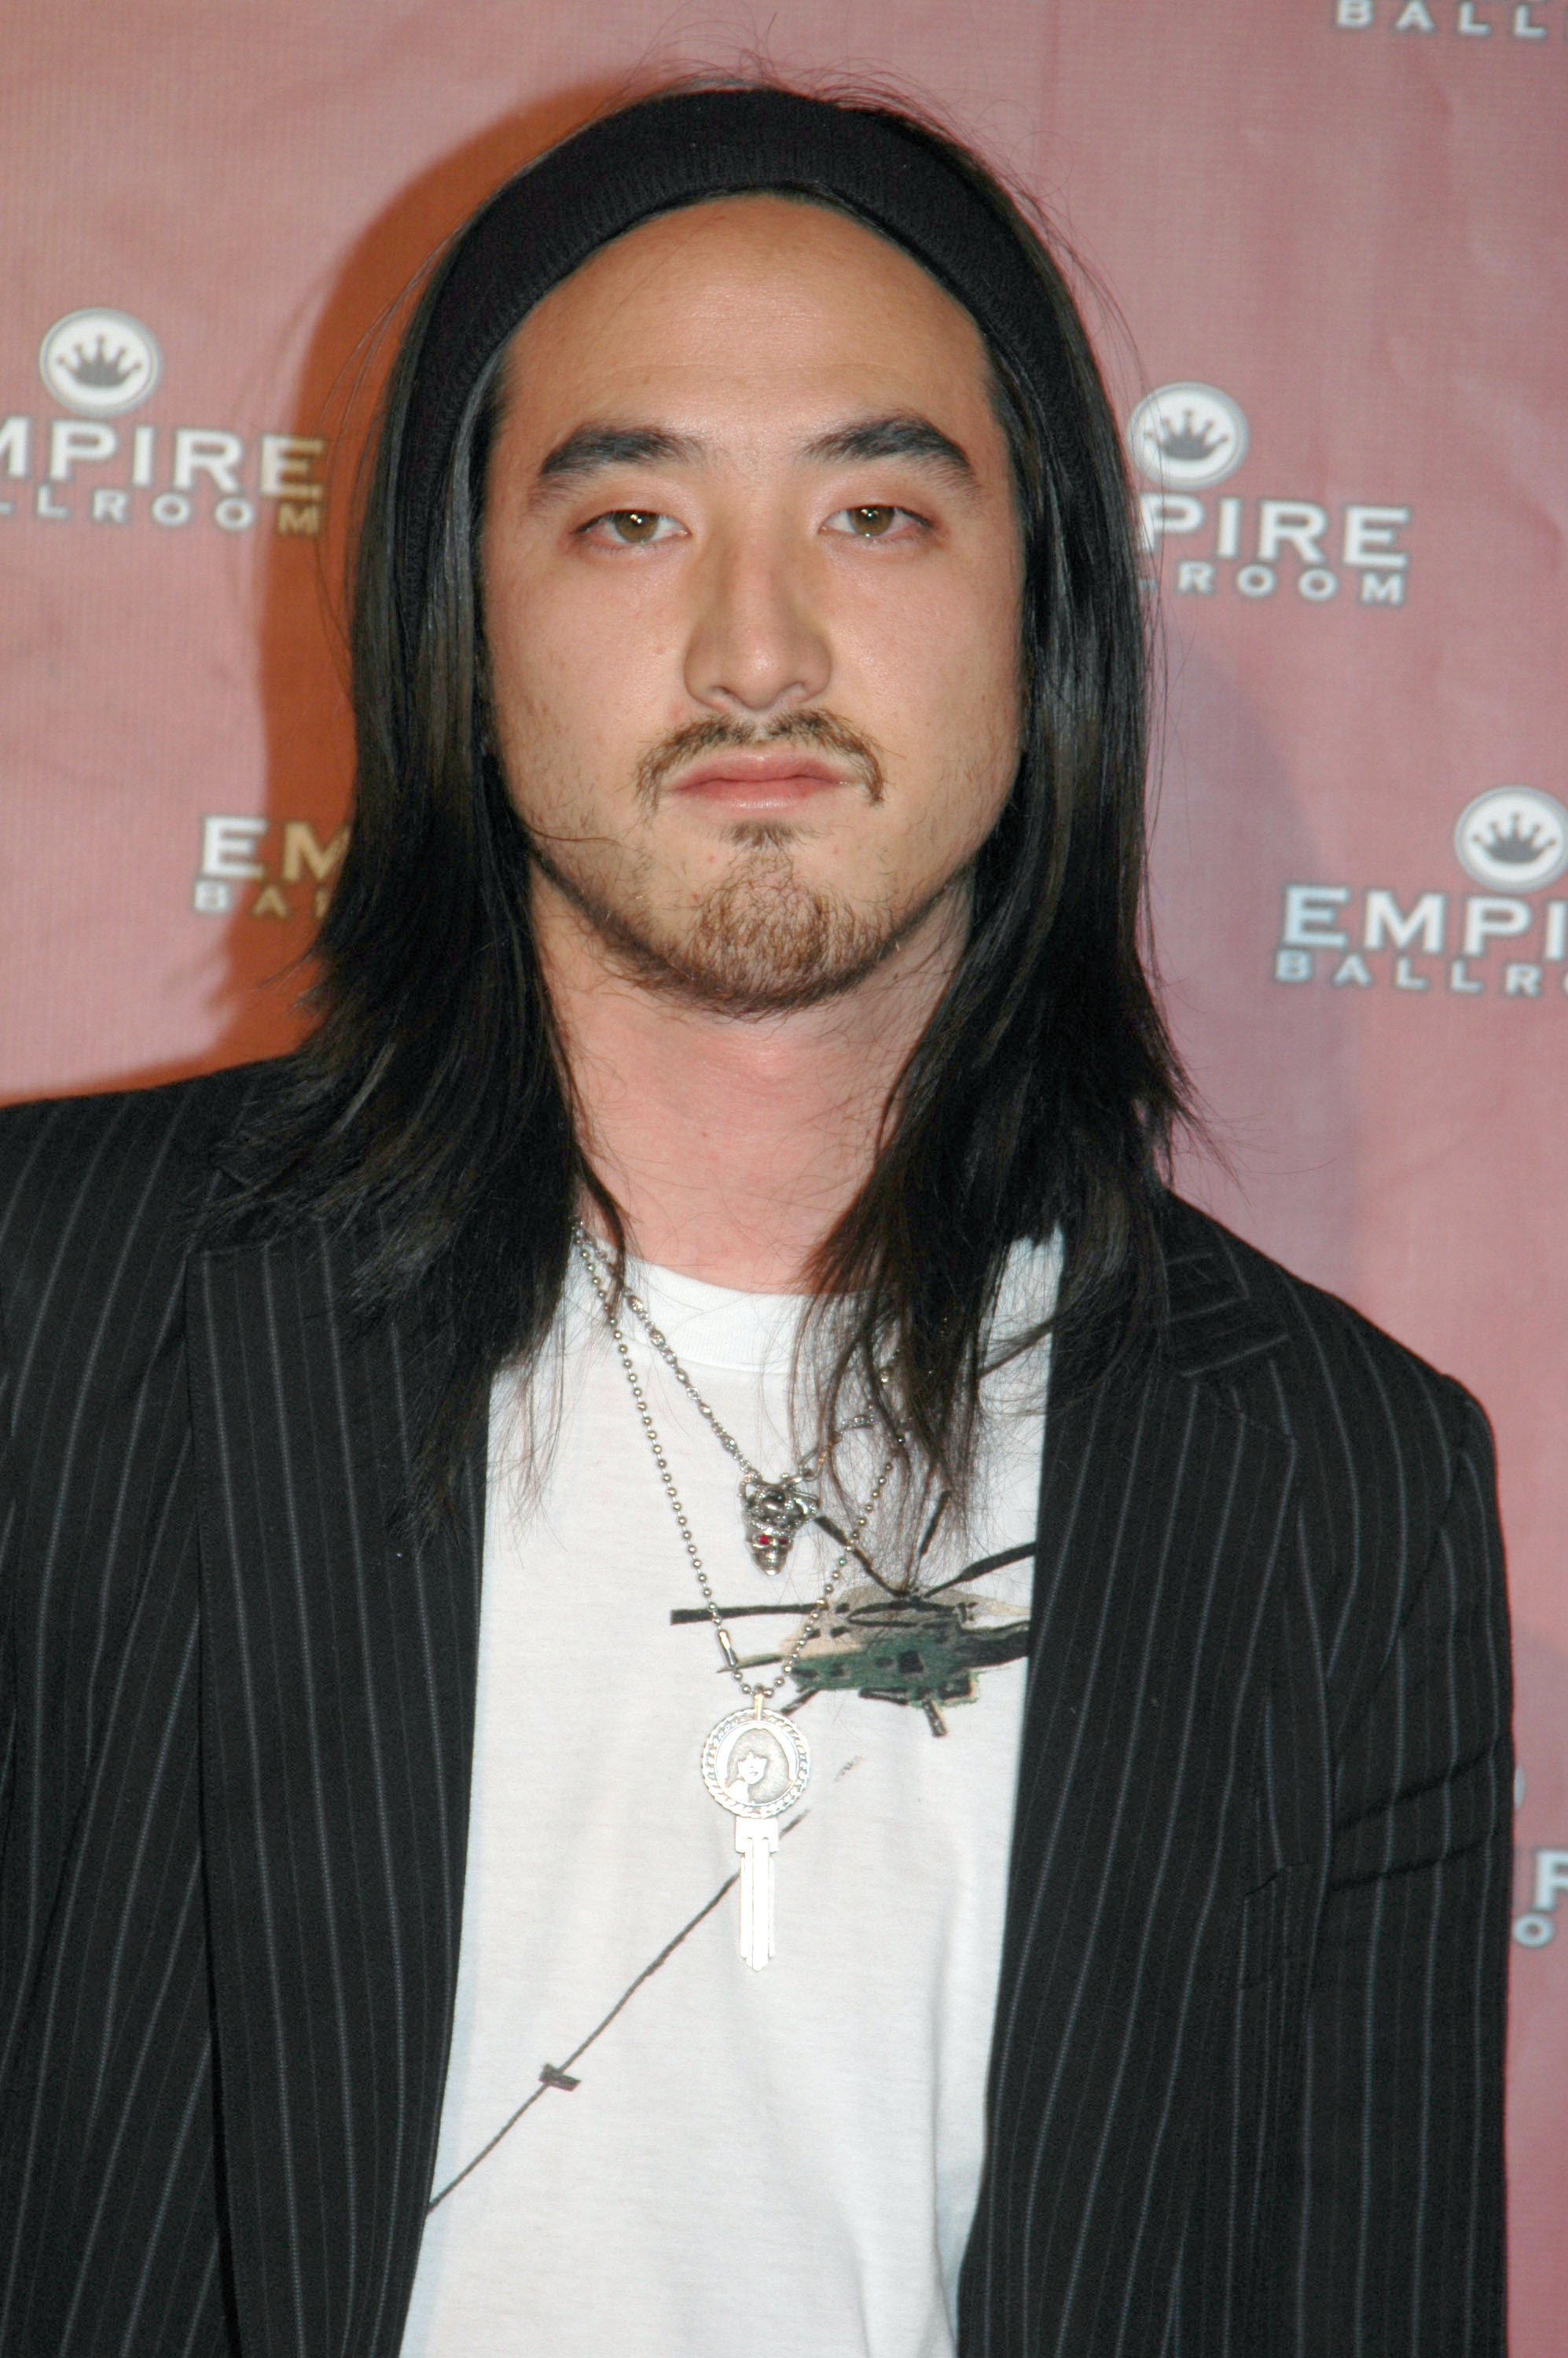 Steve Aoki when he was younger